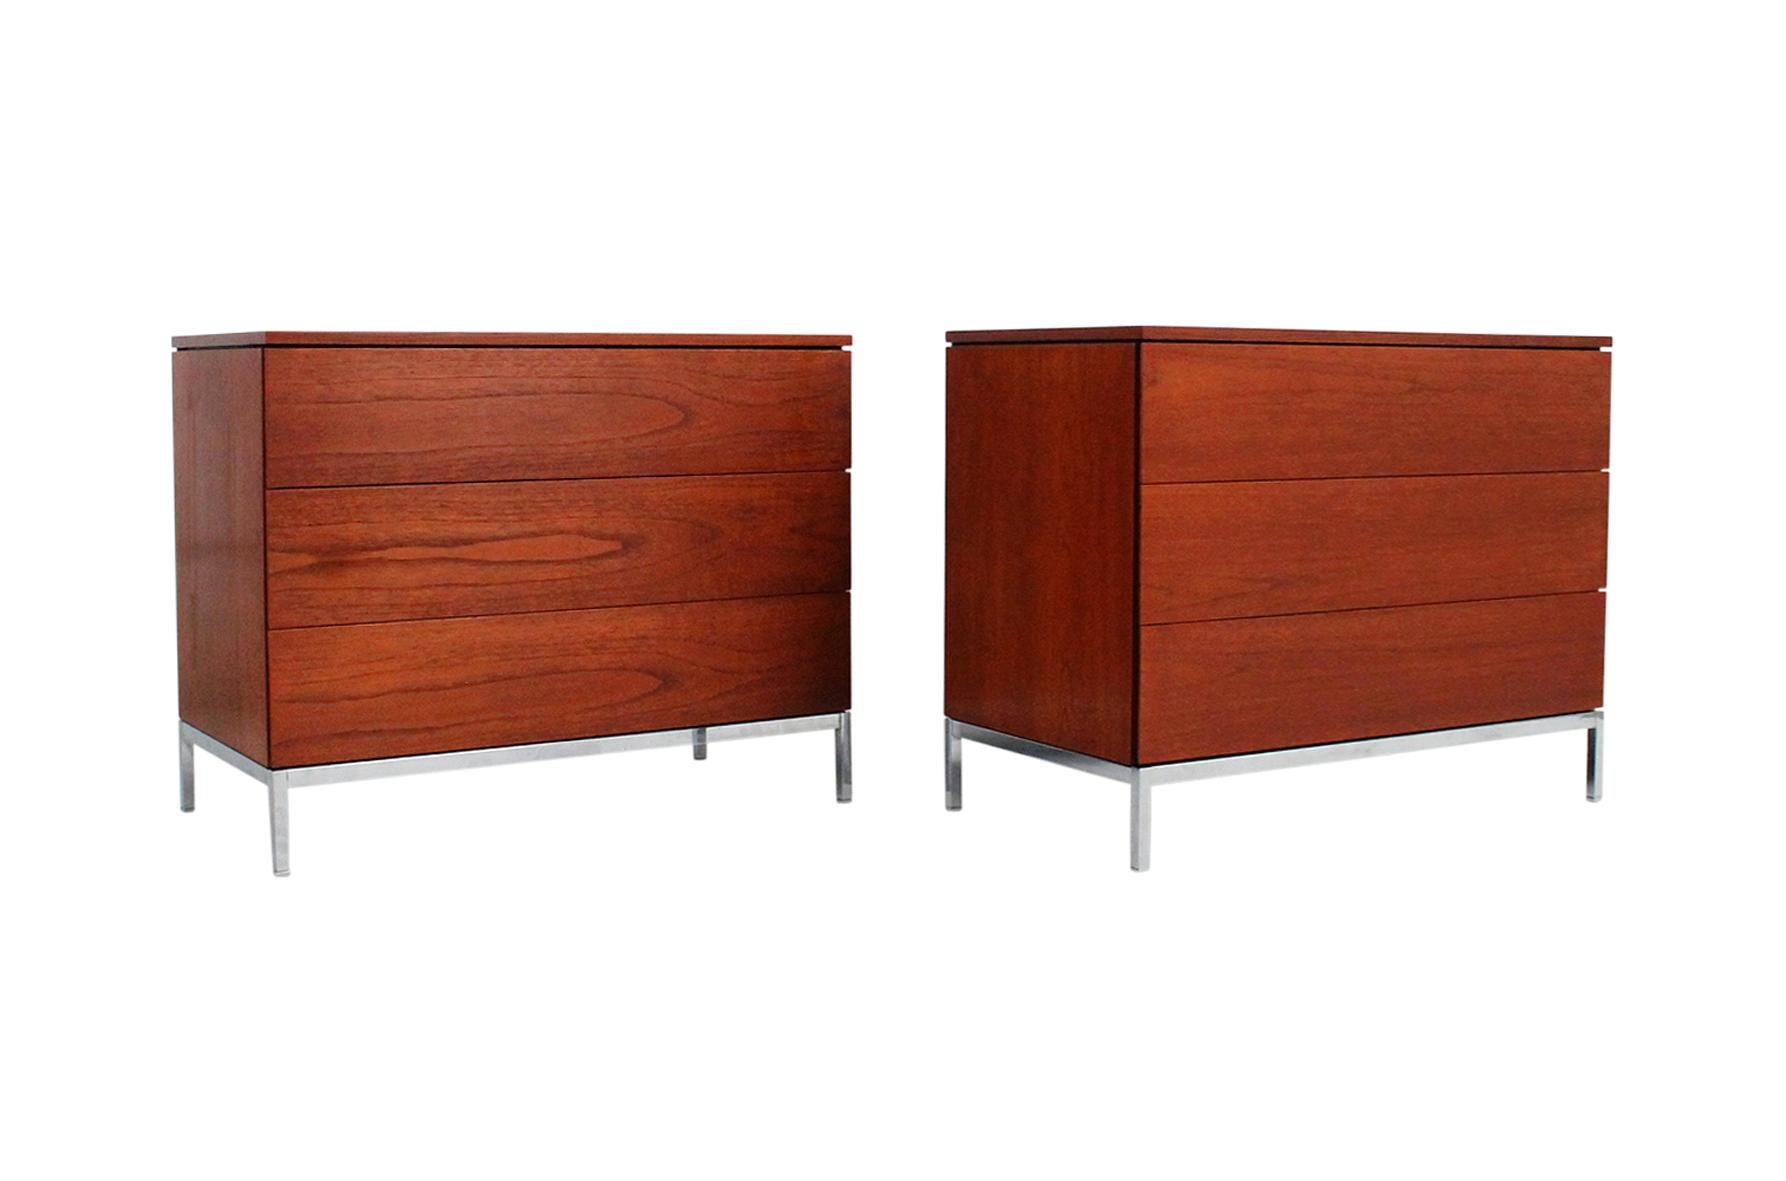 Matched pair of dressers in teak designed by Florence Knoll for Knoll International. Each dresser with three drawers, top drawers with dividers, on chromed steel bases. One dresser with the original Knoll paper label to the underside.